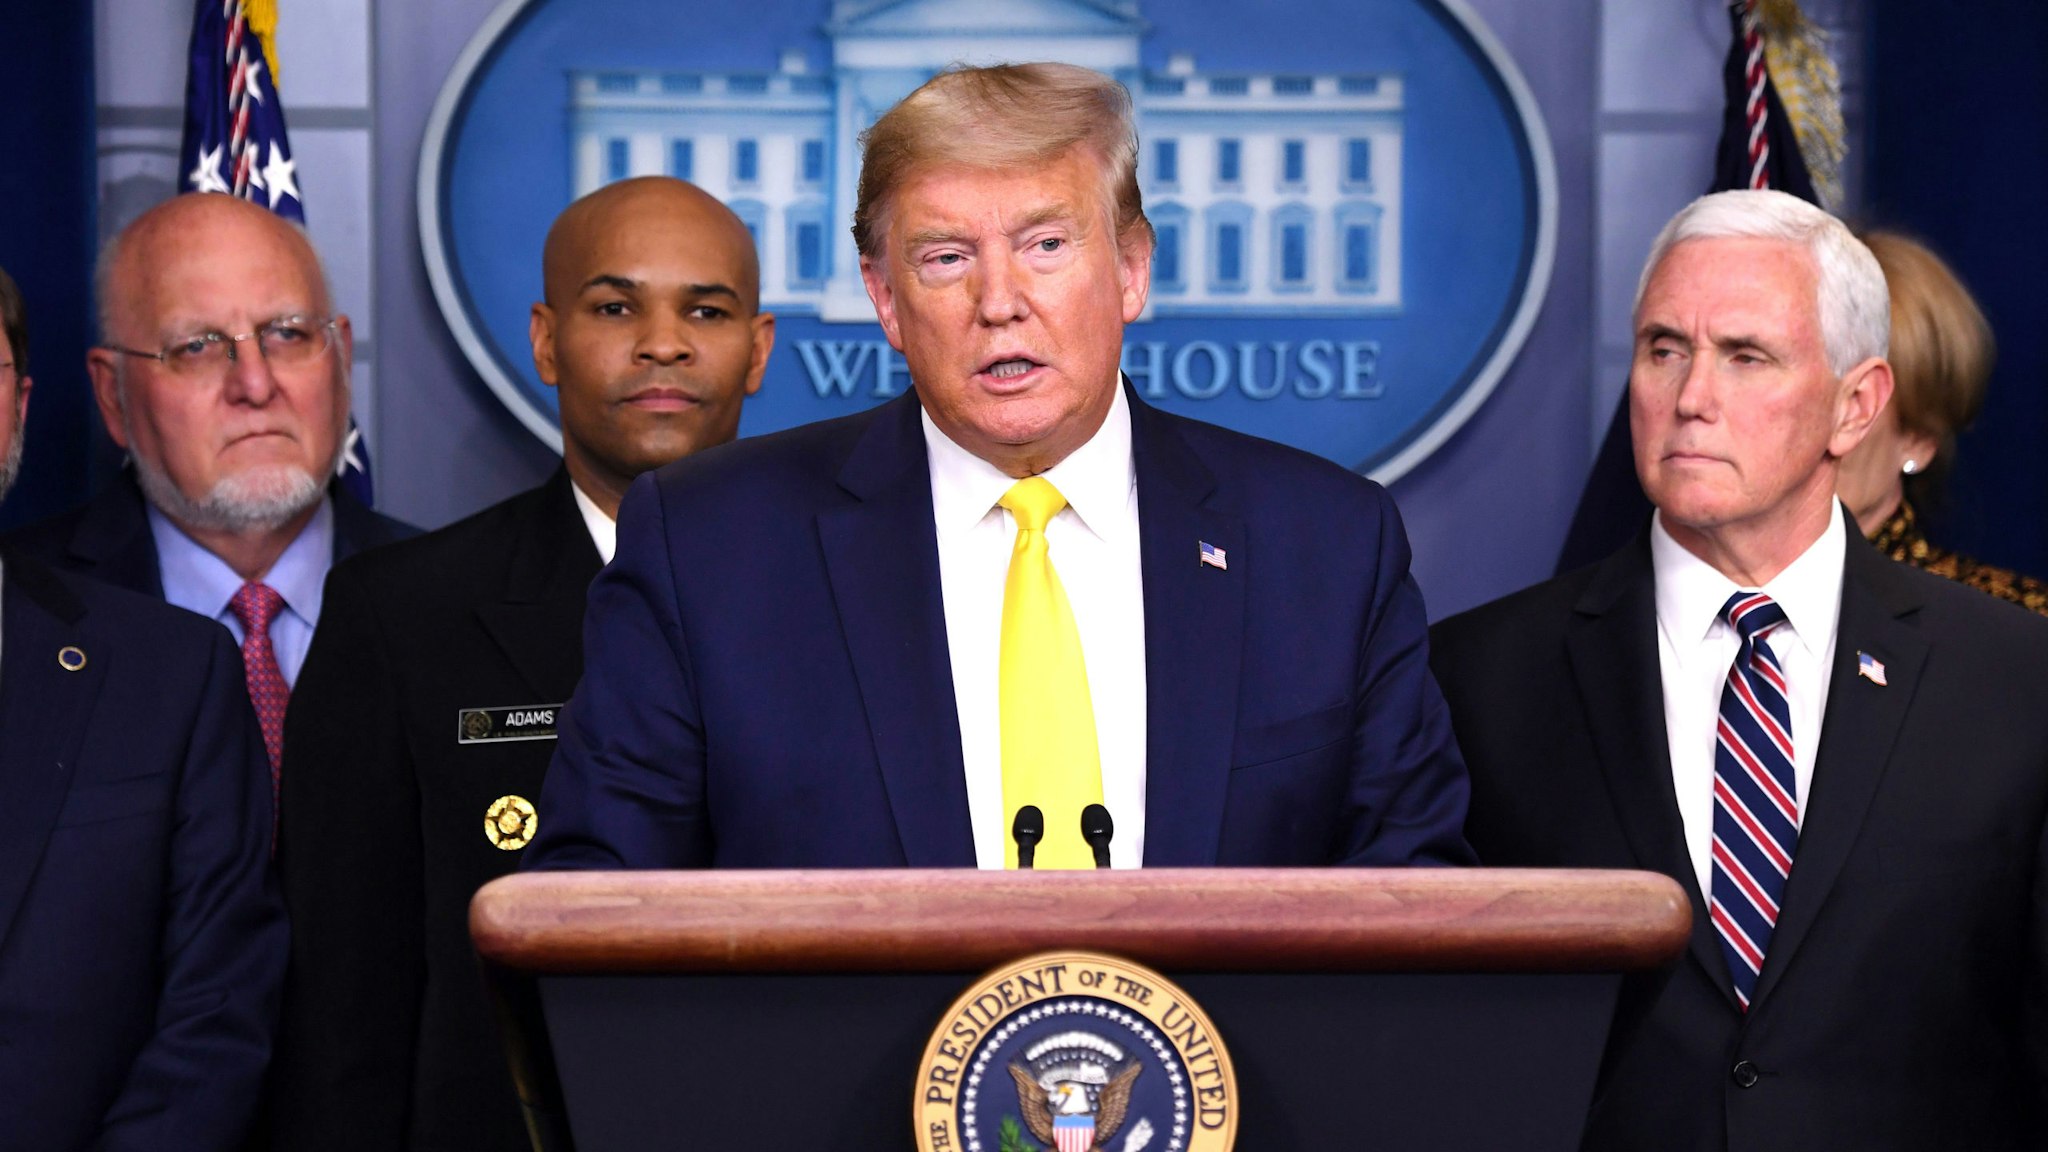 US President Donald Trump speaks about the coronavirus alongside Vice President Mike Pence and members of the Coronavirus Task Force in the Brady Press Briefing Room at the White House in Washington, DC, March 9, 2020.